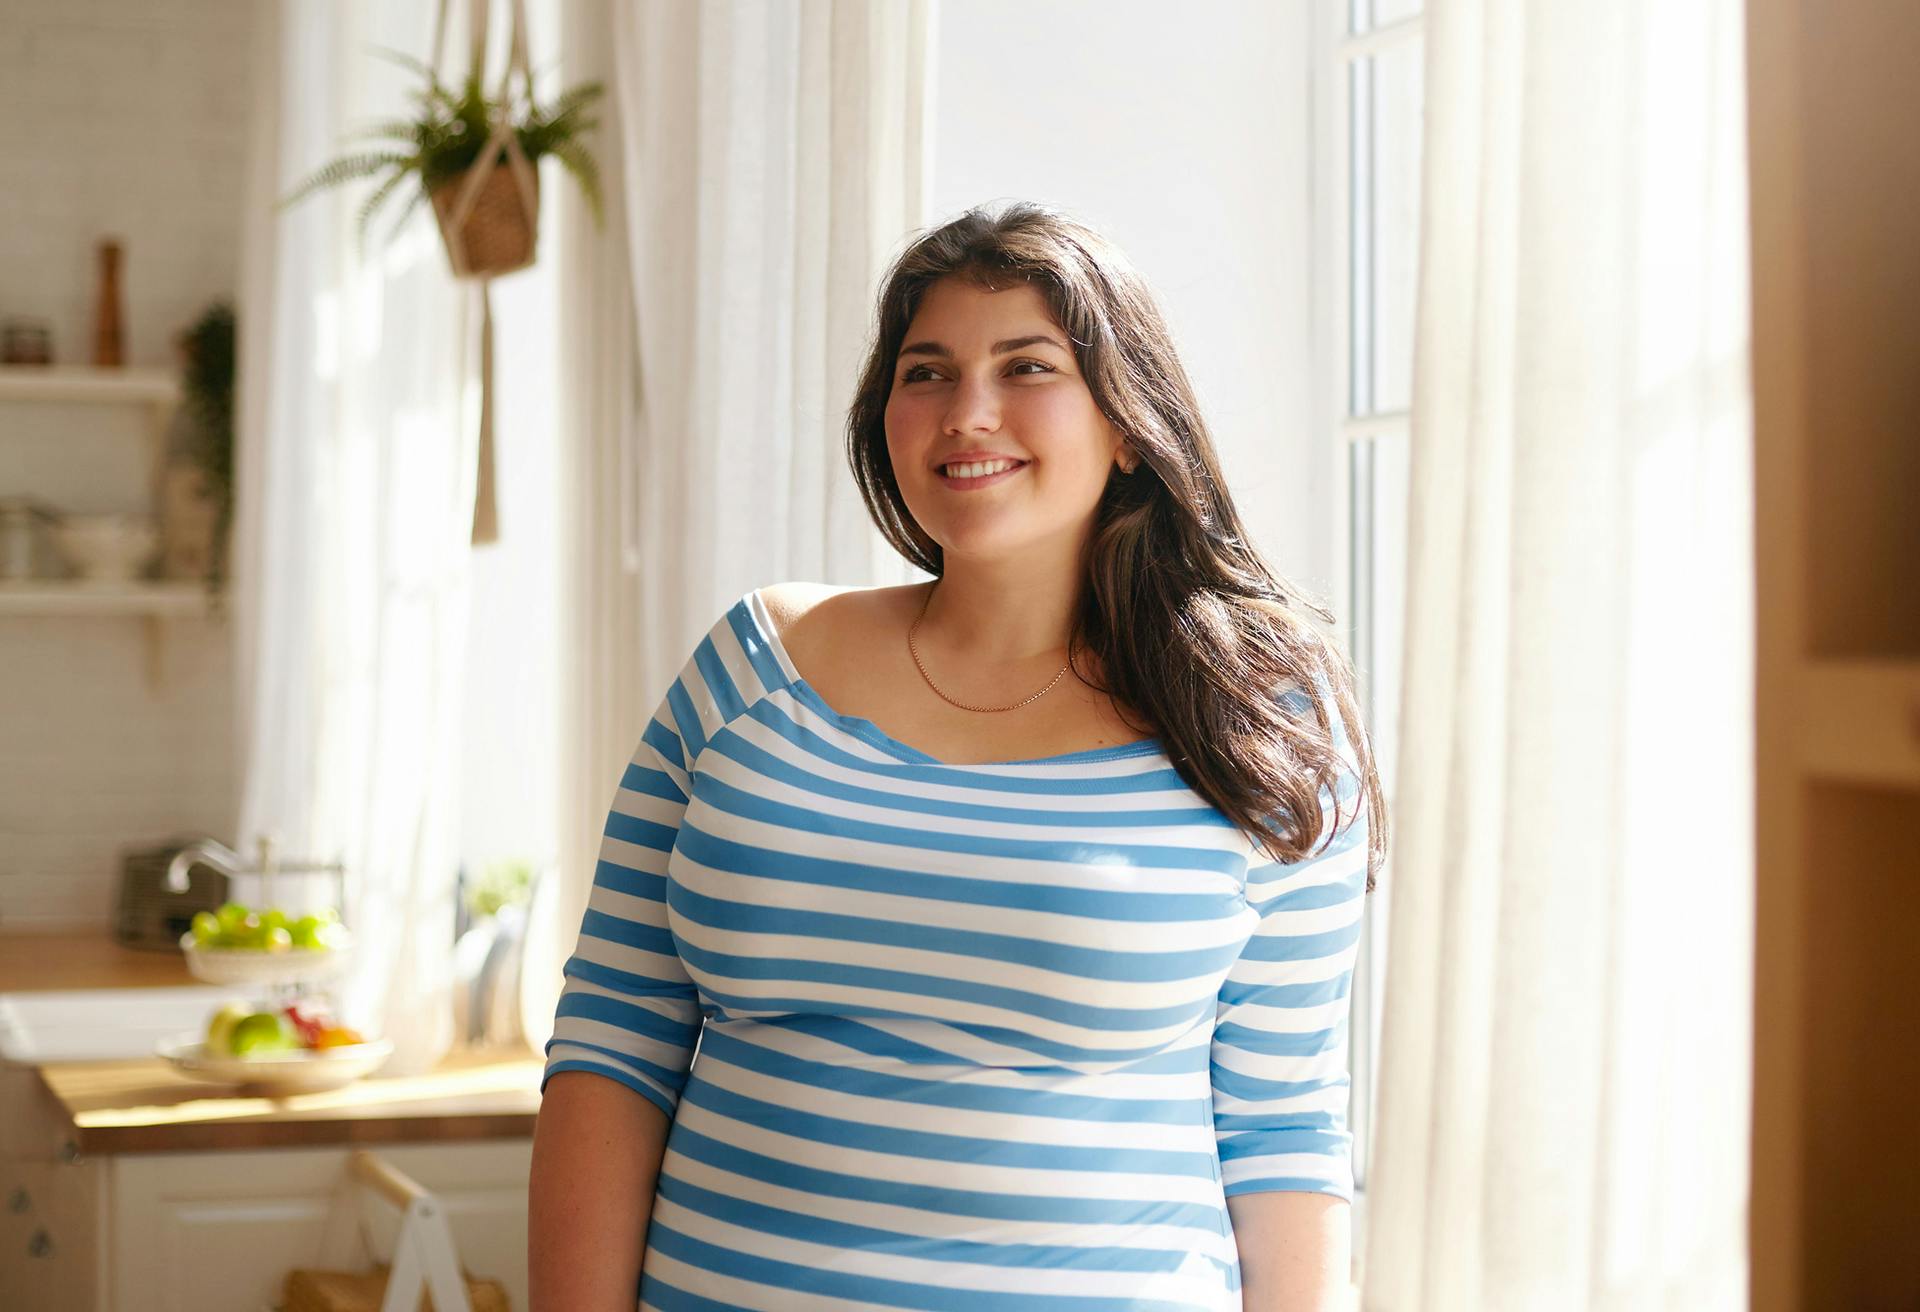 Woman in blue and white striped shirt in front of a window